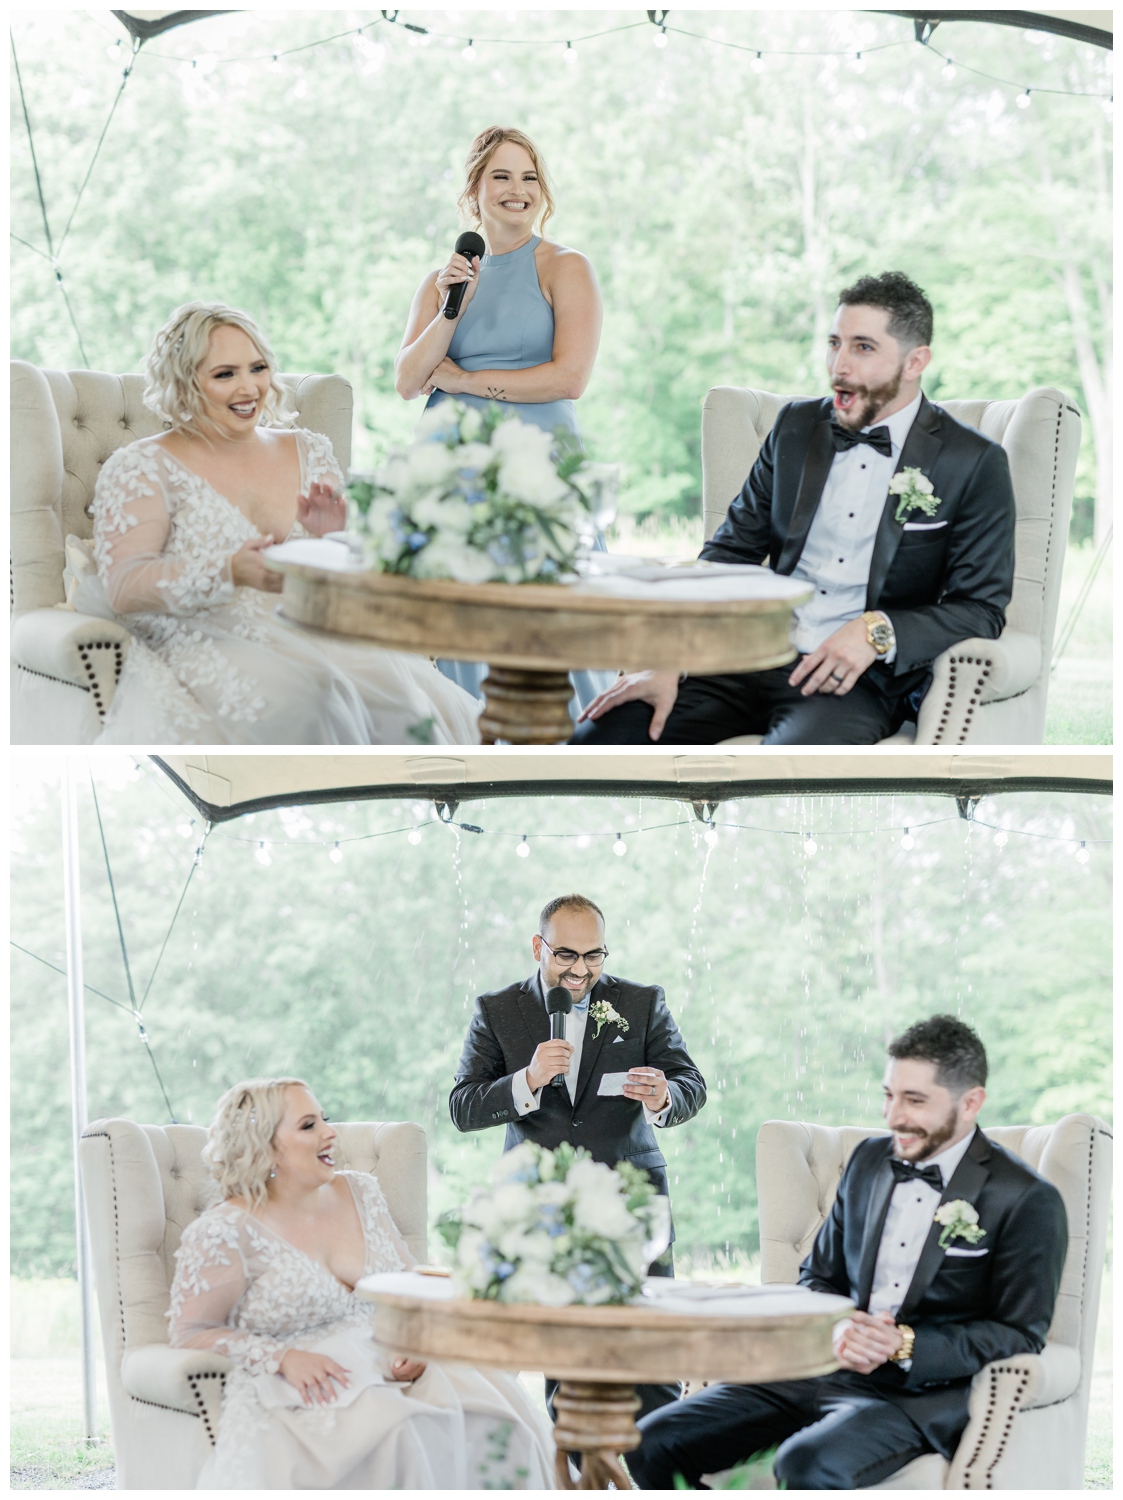 Maid of Honor and Best Man giving speeches during a wedding reception under a tent outside in the middle of a rainstorm. 